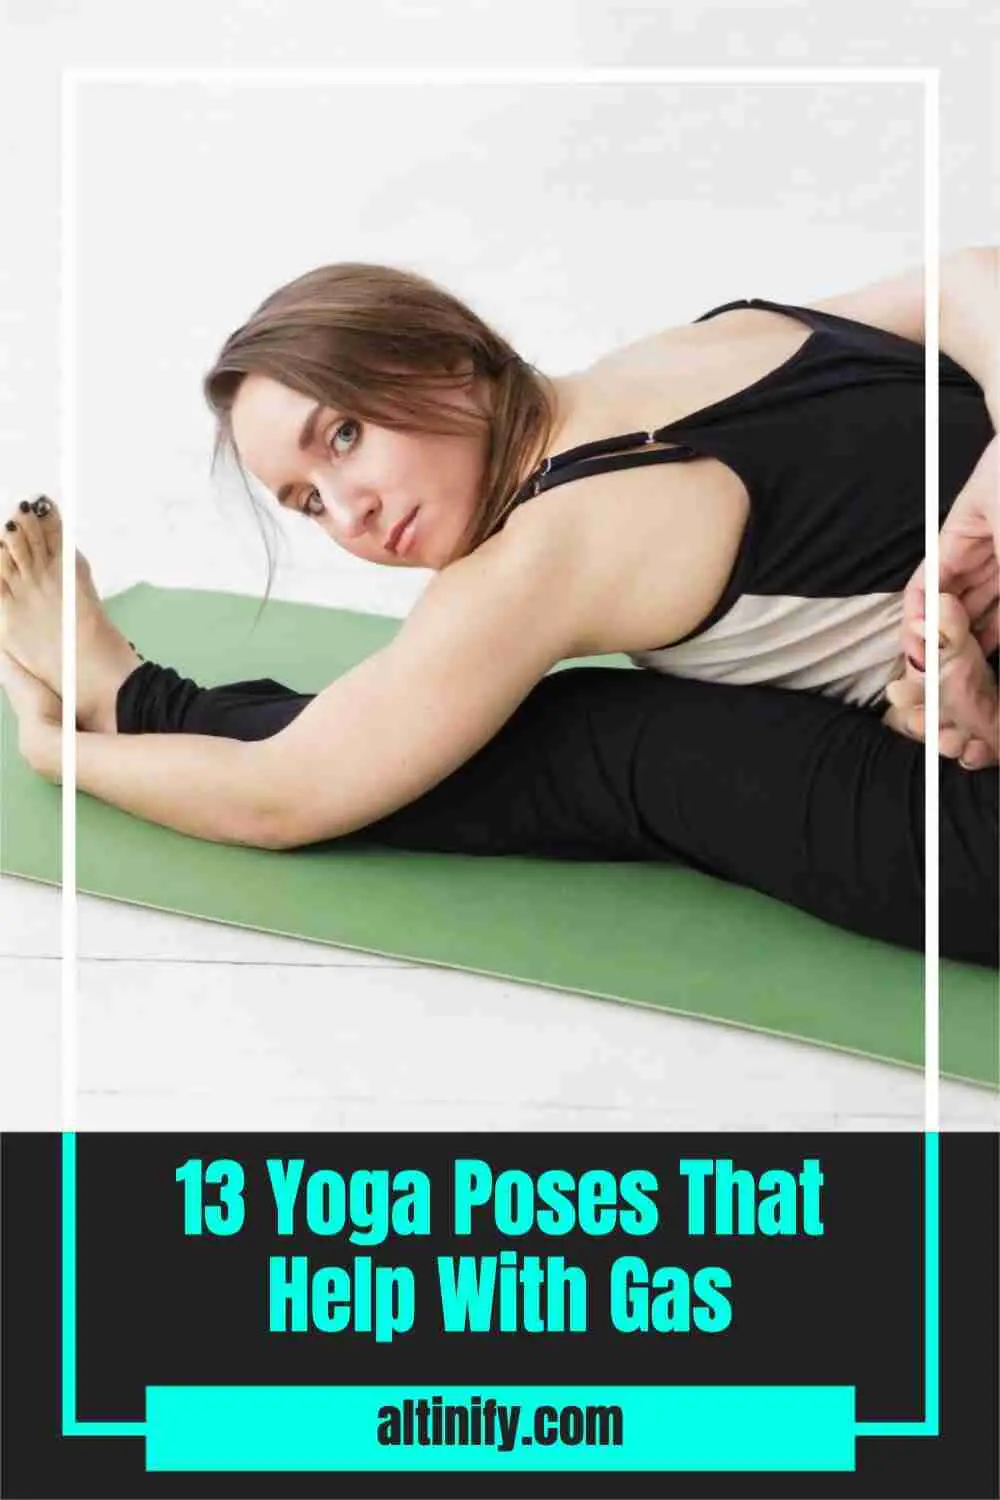 13 Yoga Poses That Help With Gas